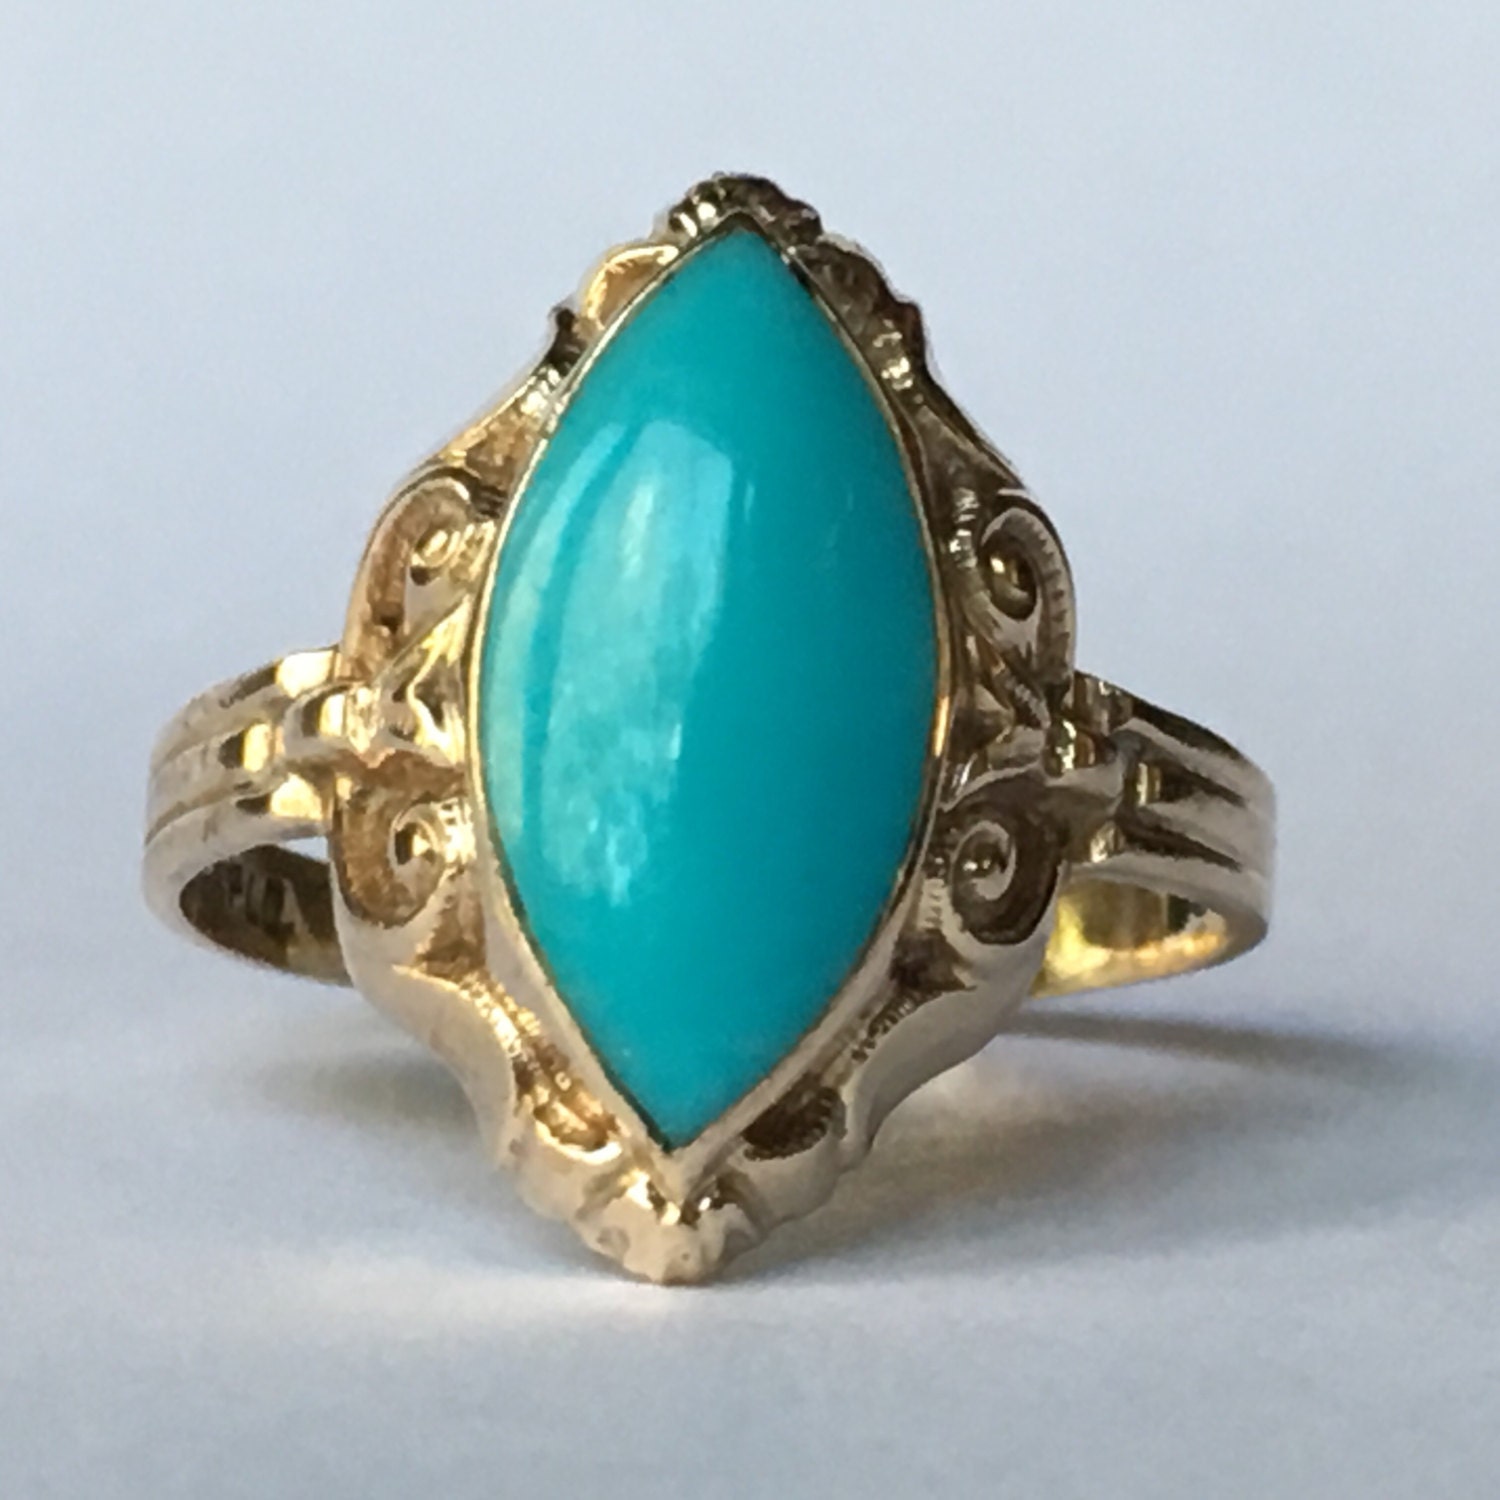 Antique Turquoise  Ring  10K Yellow Gold Art Nouveau Ring  